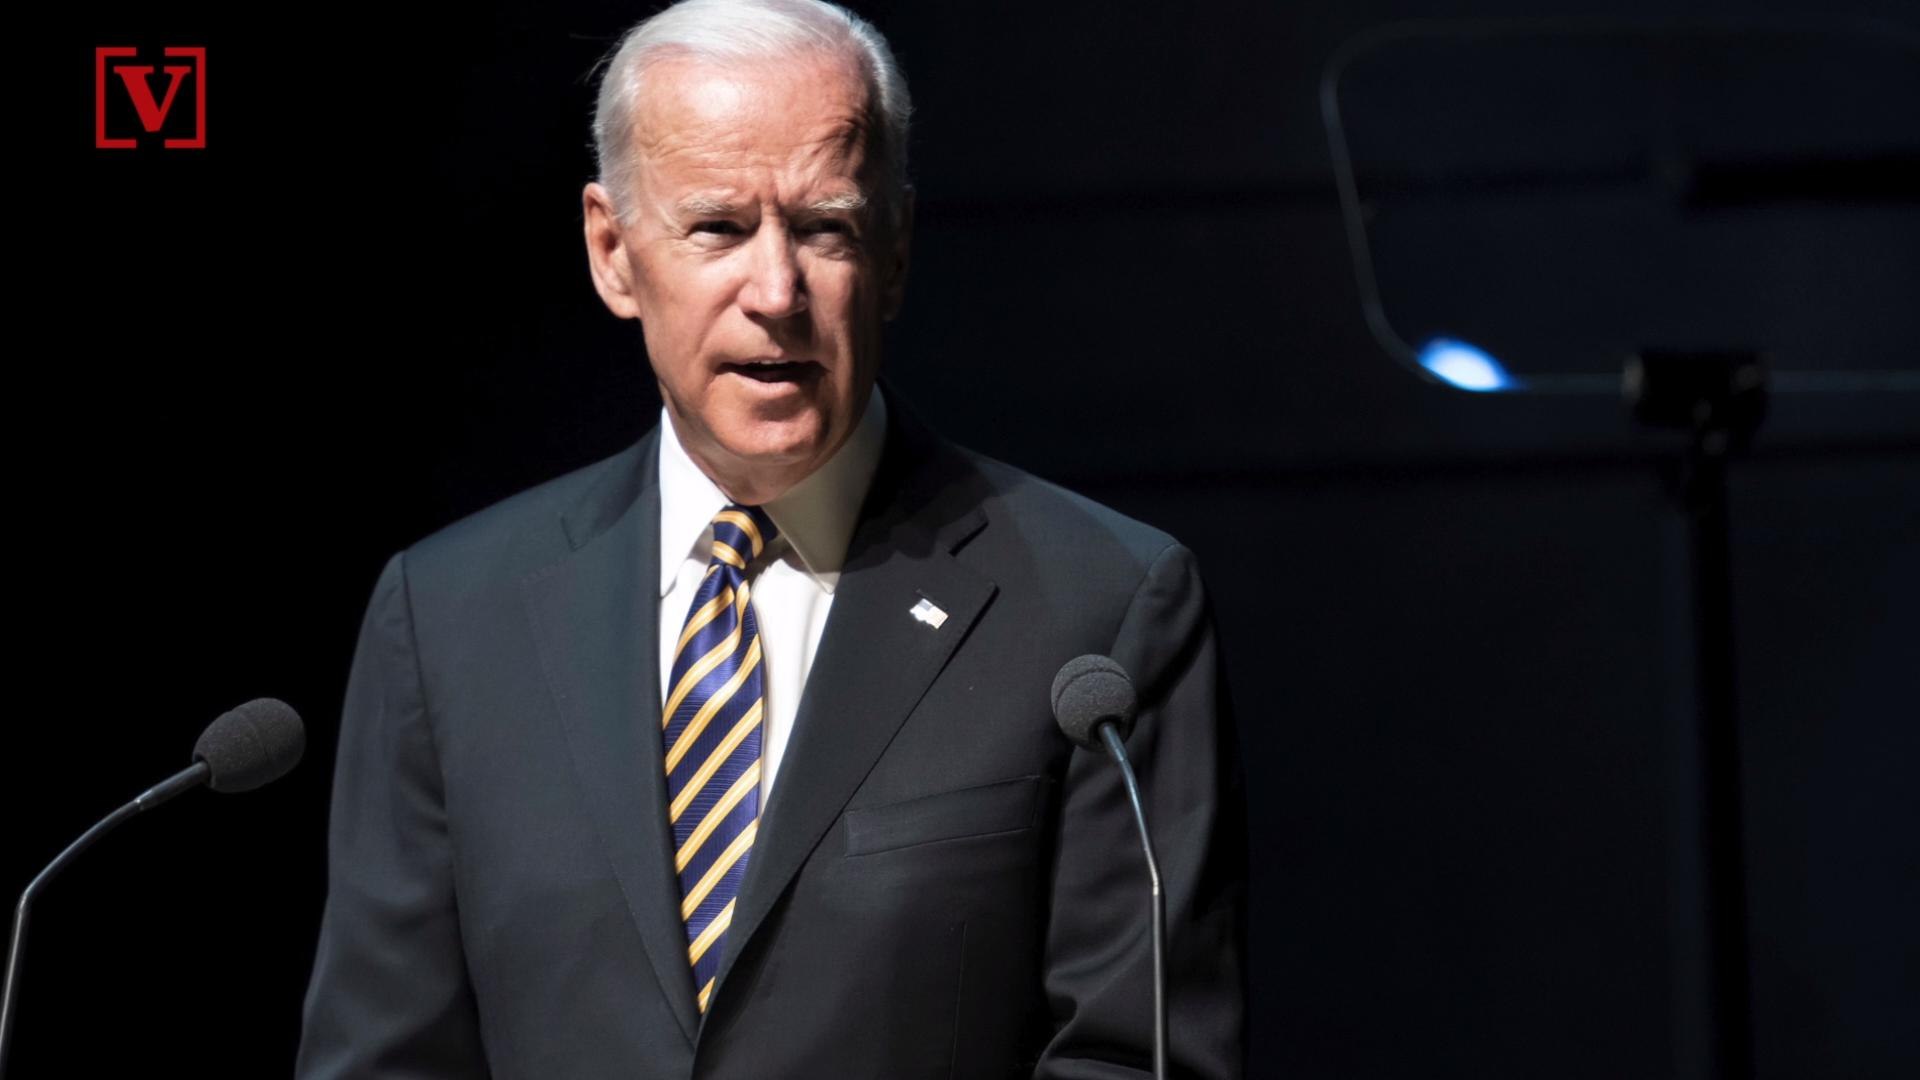 ⁣Early Polls Show Former VP Joe Biden is the Leading Potential Democratic Candidate to Win in 2020